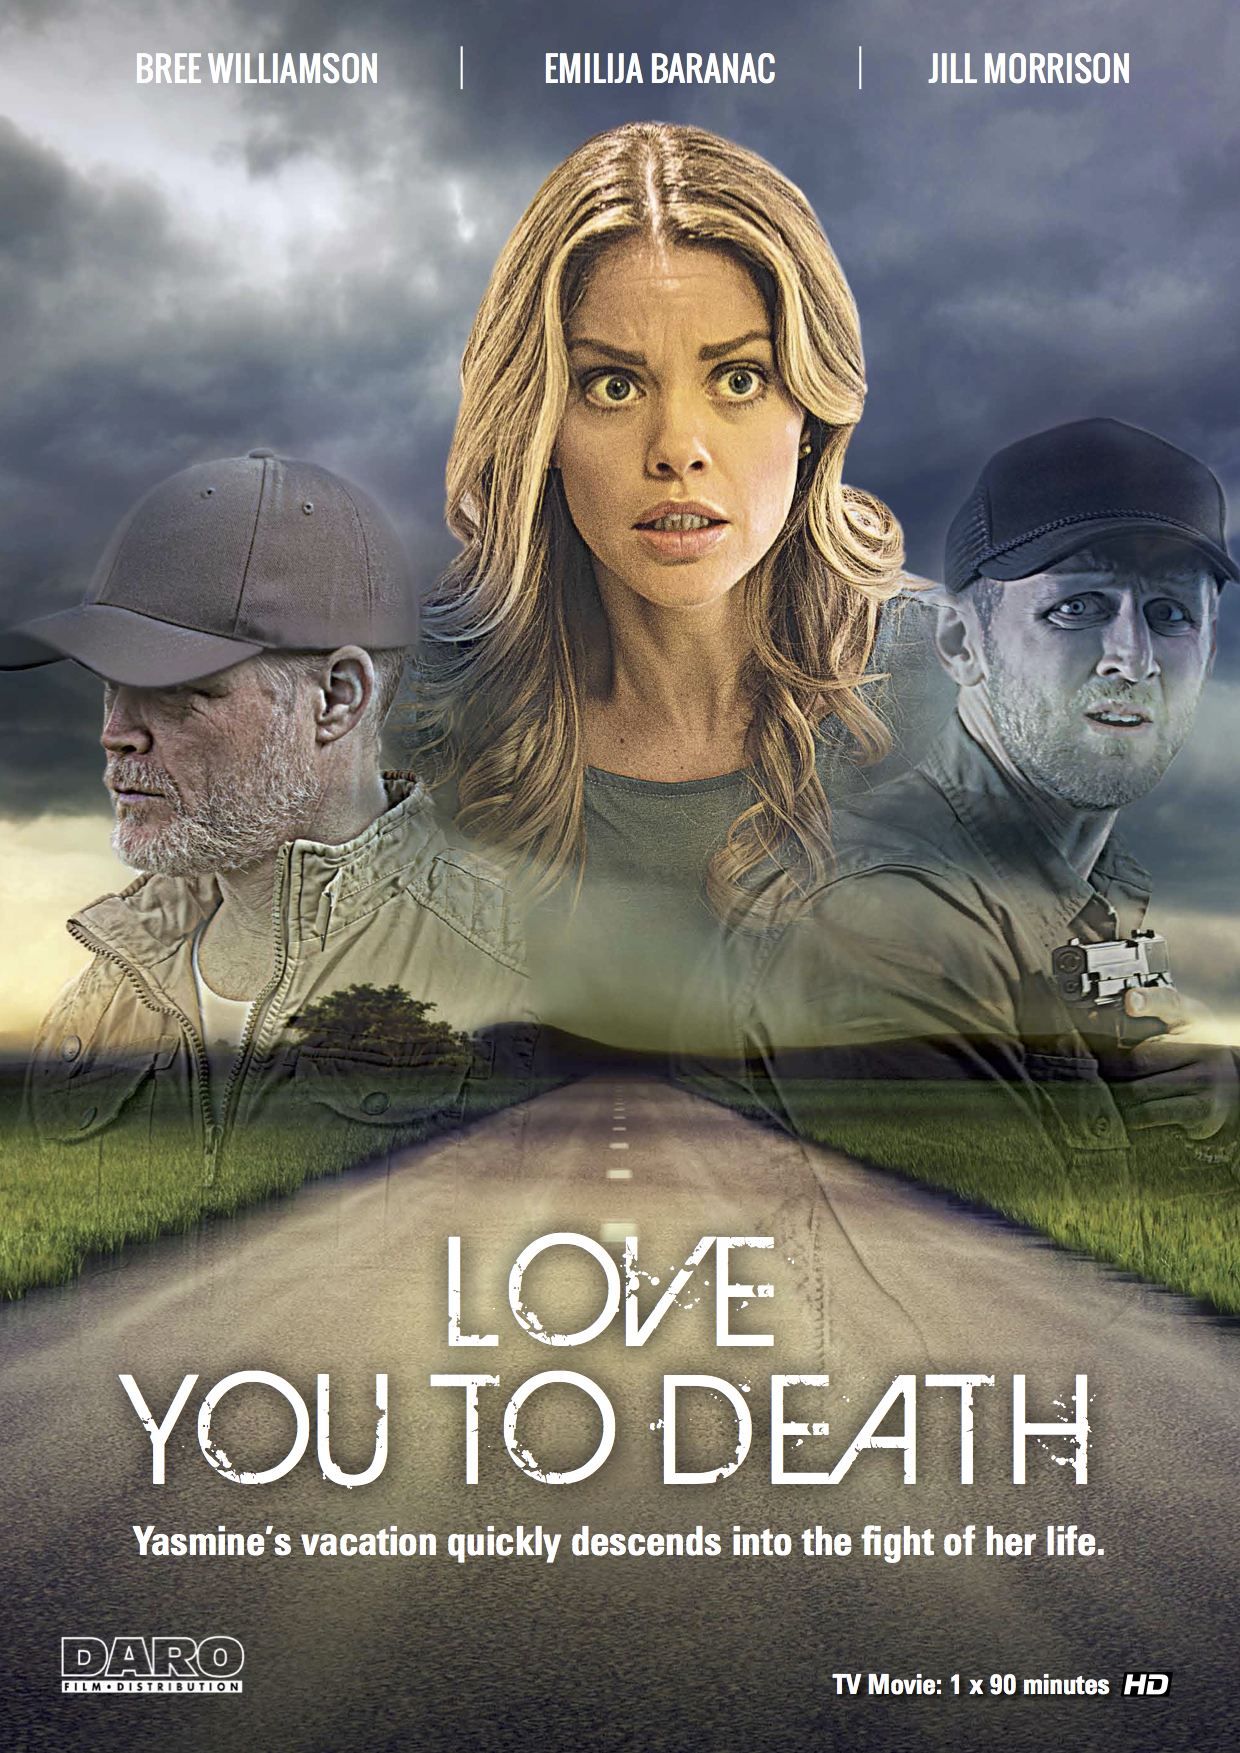 Love You to Death (2015) starring Bree Williamson on DVD on DVD